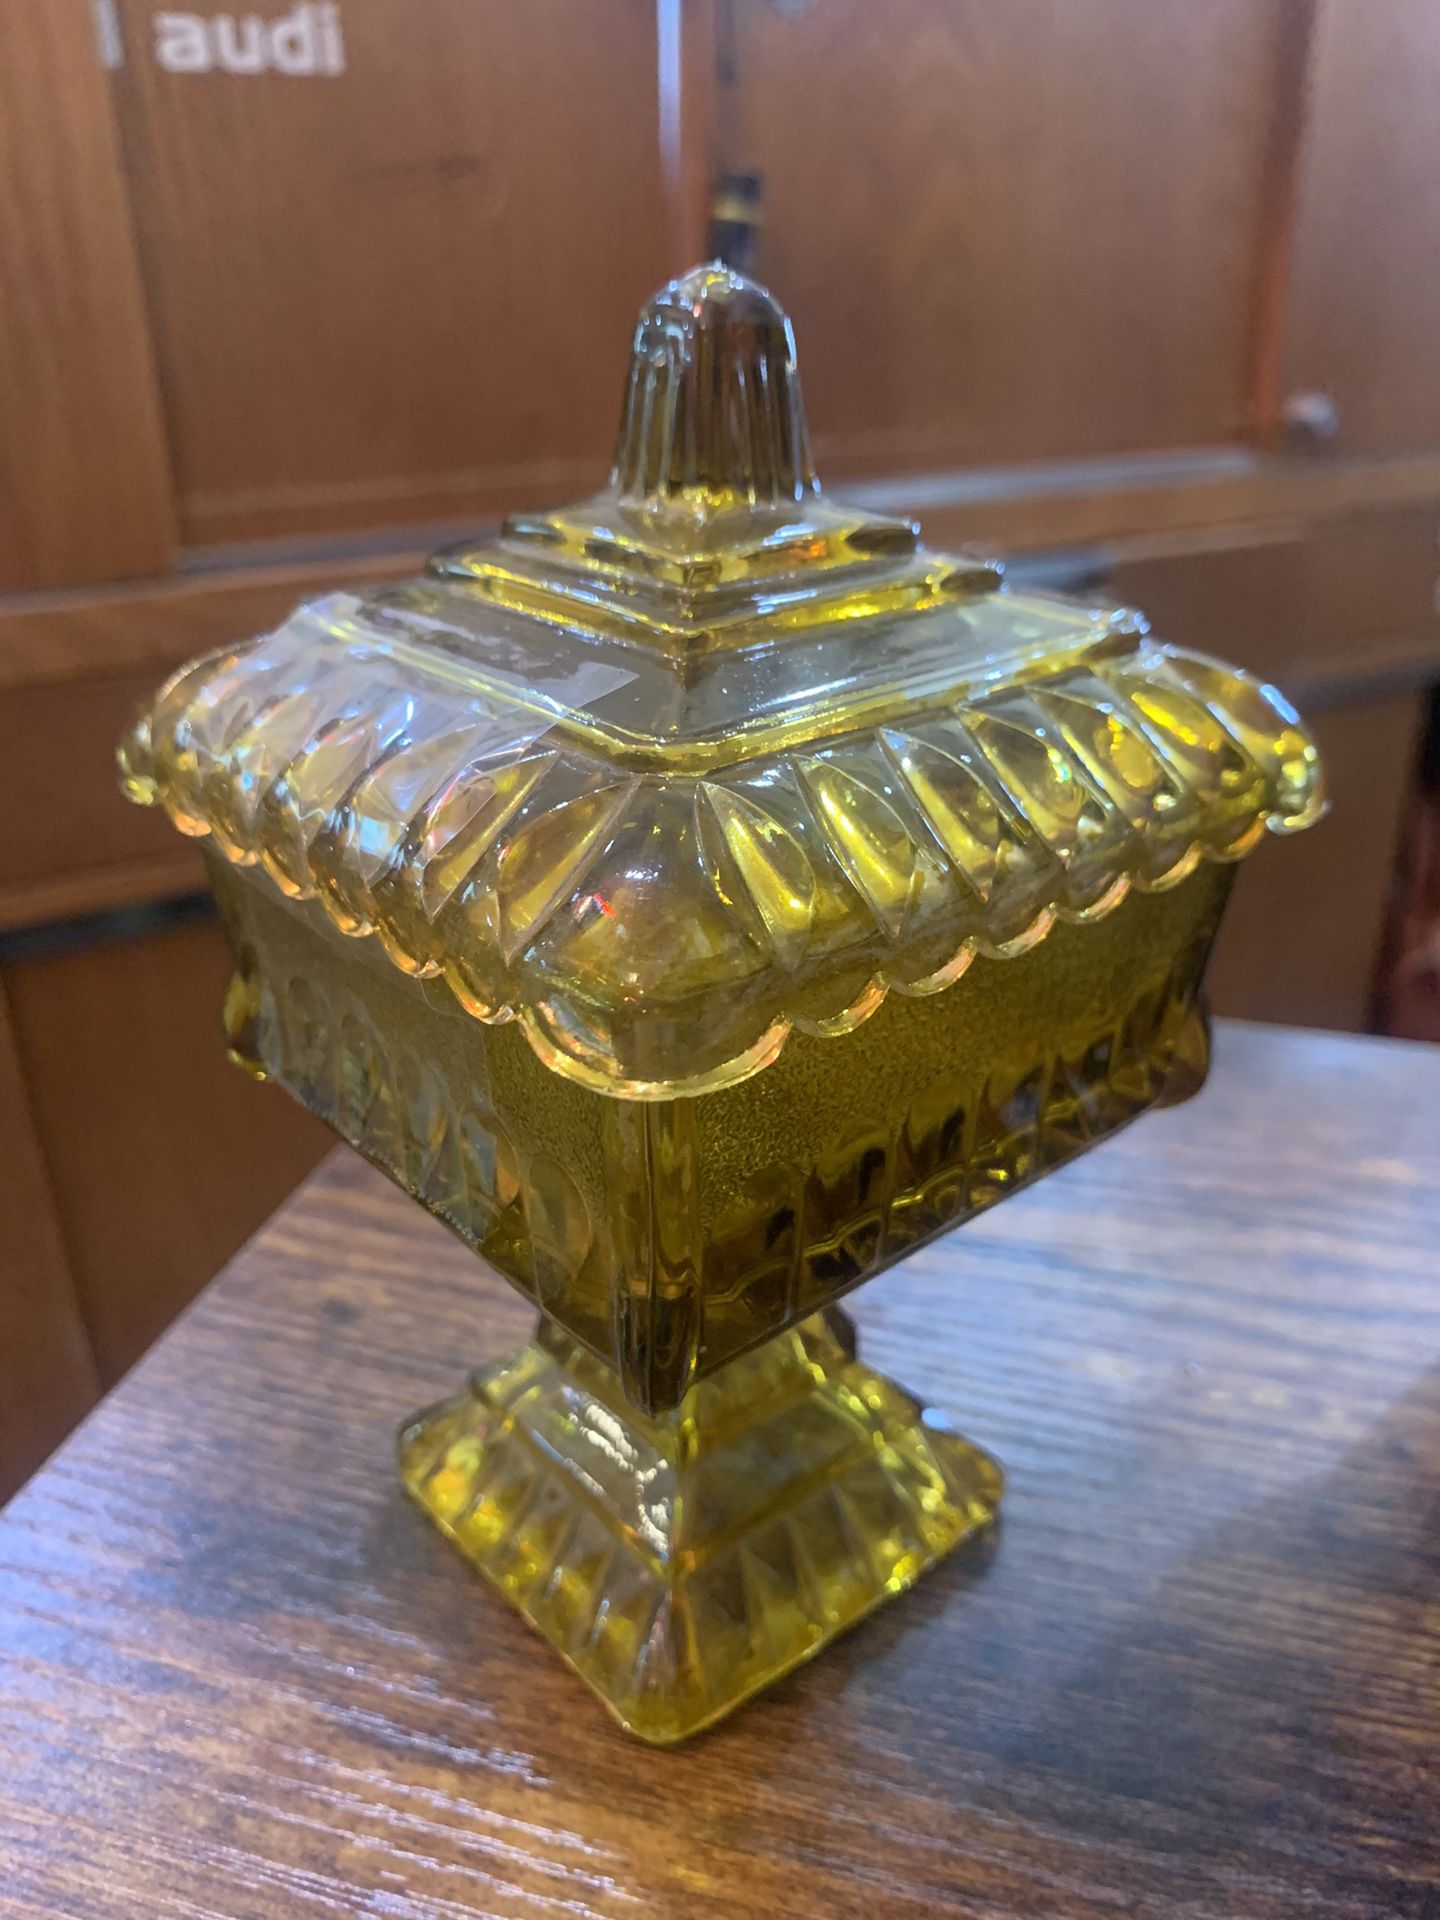 5x7 amber mid century modern candy dish. 25.00.  Johanna at Antiques and More. Located at 316b Main Street Buda. Antiques vintage retro furniture coll